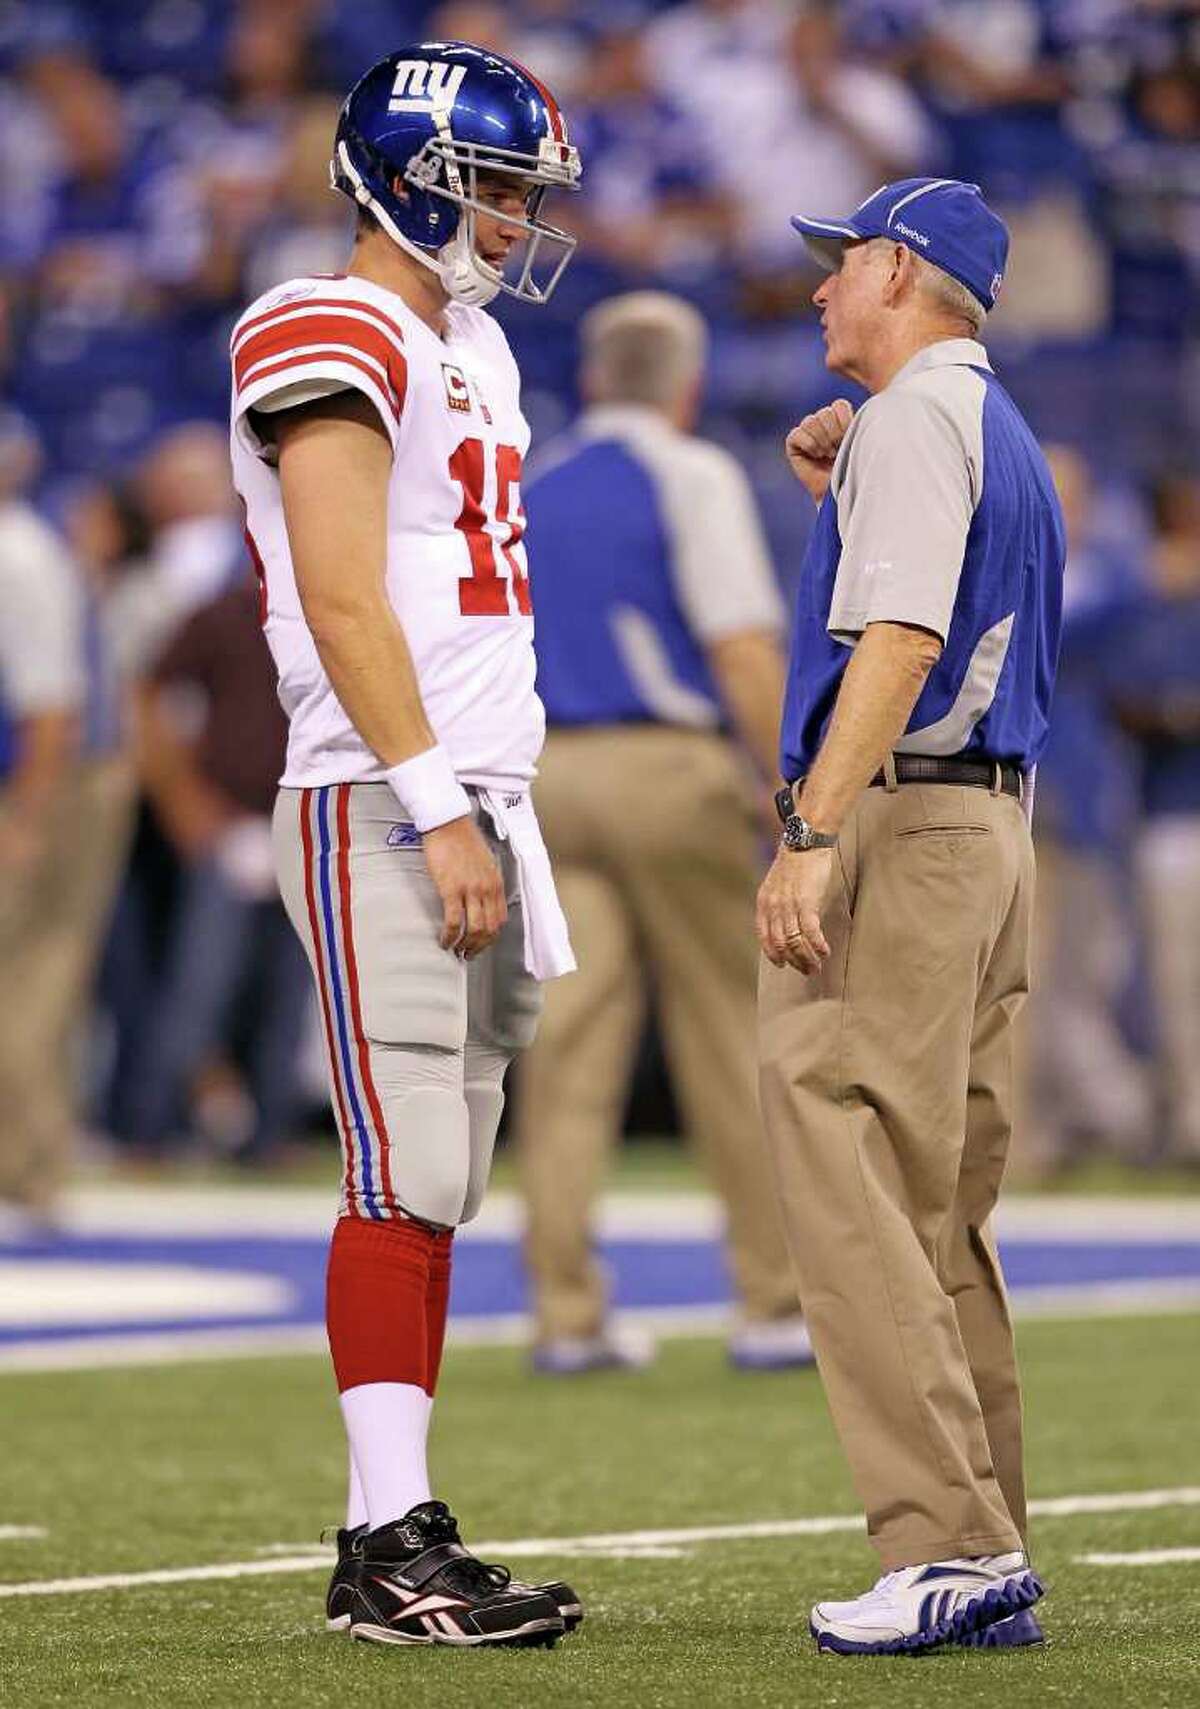 INDIANAPOLIS - SEPTEMBER 19: Eli Manning #10 of the New York Giants talks with Head Coach Tom Coughlin before the NFL game against the Indianapolis Colts at Lucas Oil Stadium on September 19, 2010 in Indianapolis, Indiana. (Photo by Andy Lyons/Getty Images) *** Local Caption *** Eli Manning;Tom Coughlin